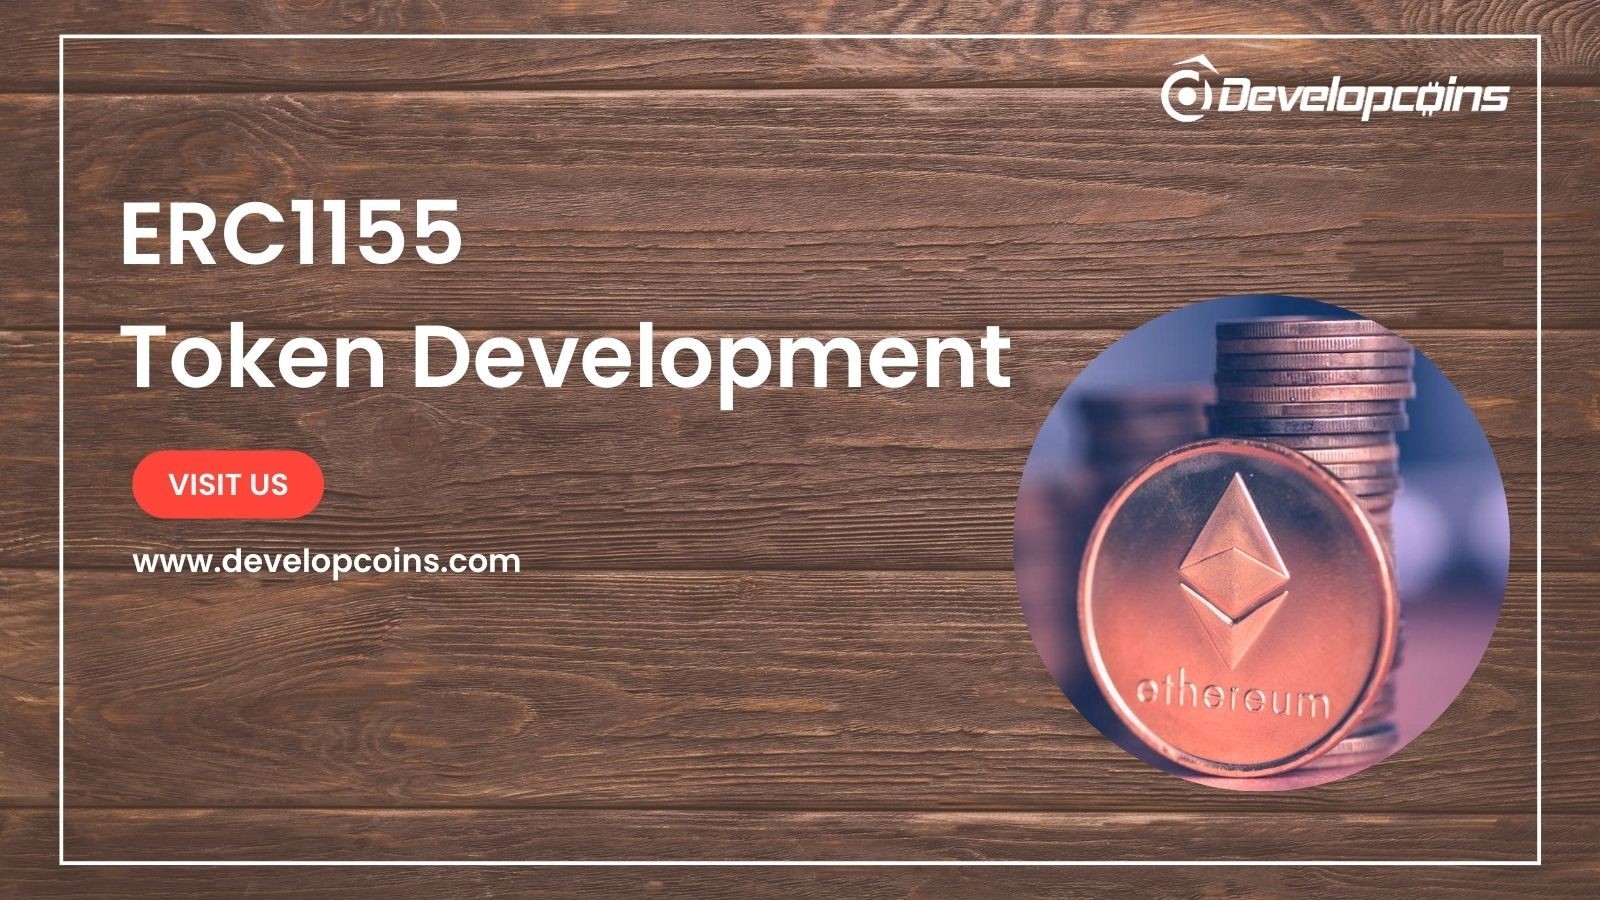 Seize Your ERC1155 Token From Developcoins Now